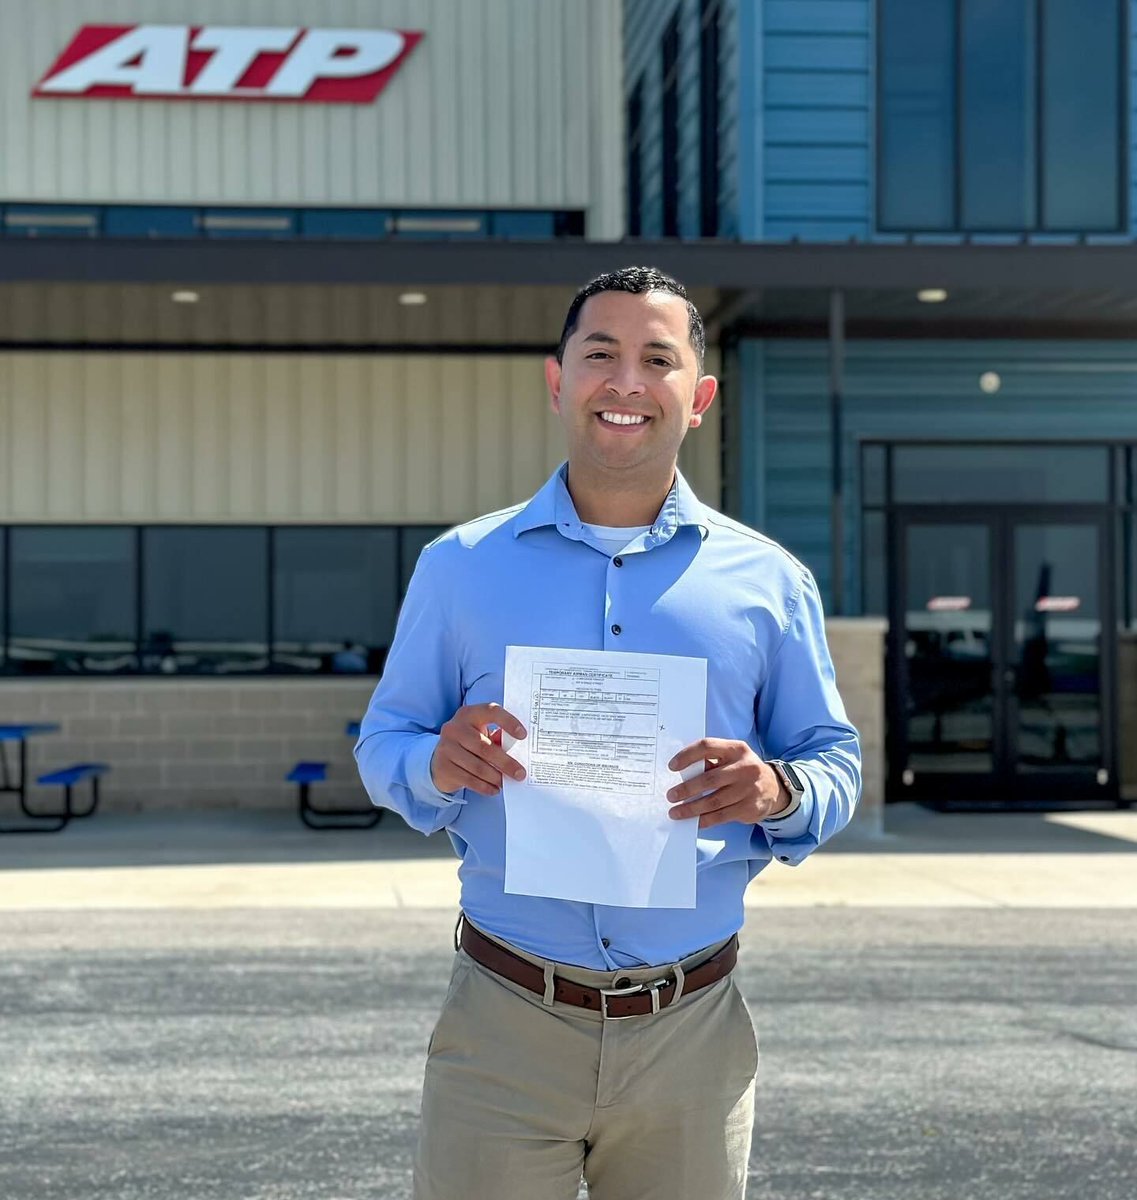 The initial CFI is no doubt one of the most demanding checkrides, but ATP-FXE student Juan made it look easy. Congratulations, Juan, on becoming a certificated flight instructor! 🛫